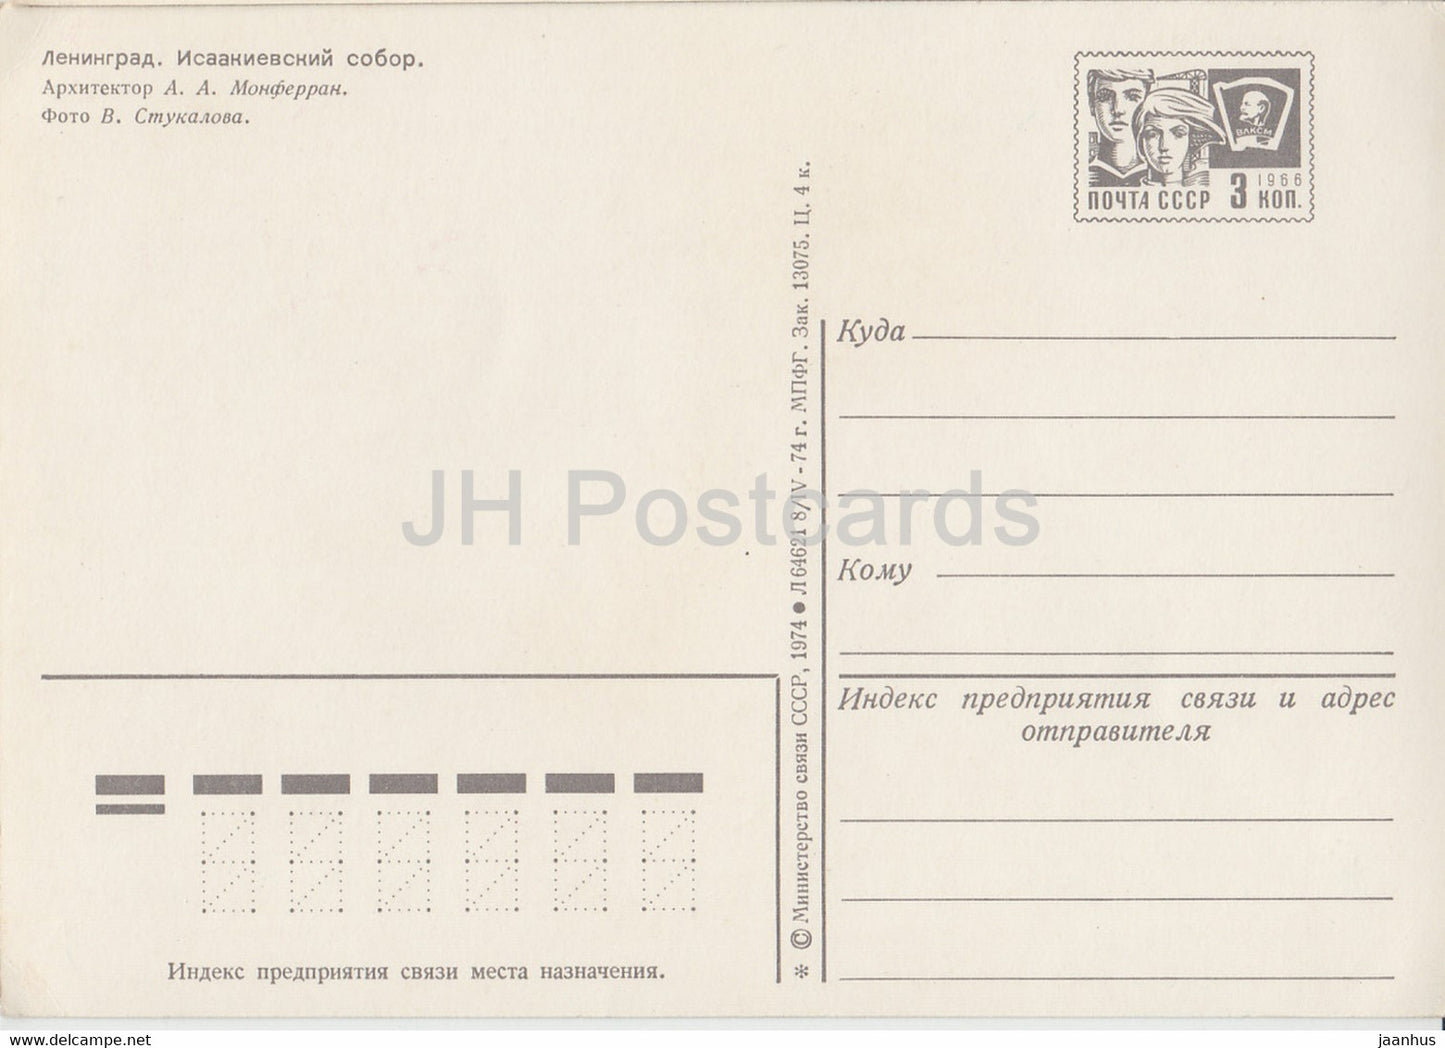 Leningrad - St Petersburg - St. Isaac's Cathedral - postal stationery - 1974 - Russia USSR - unused